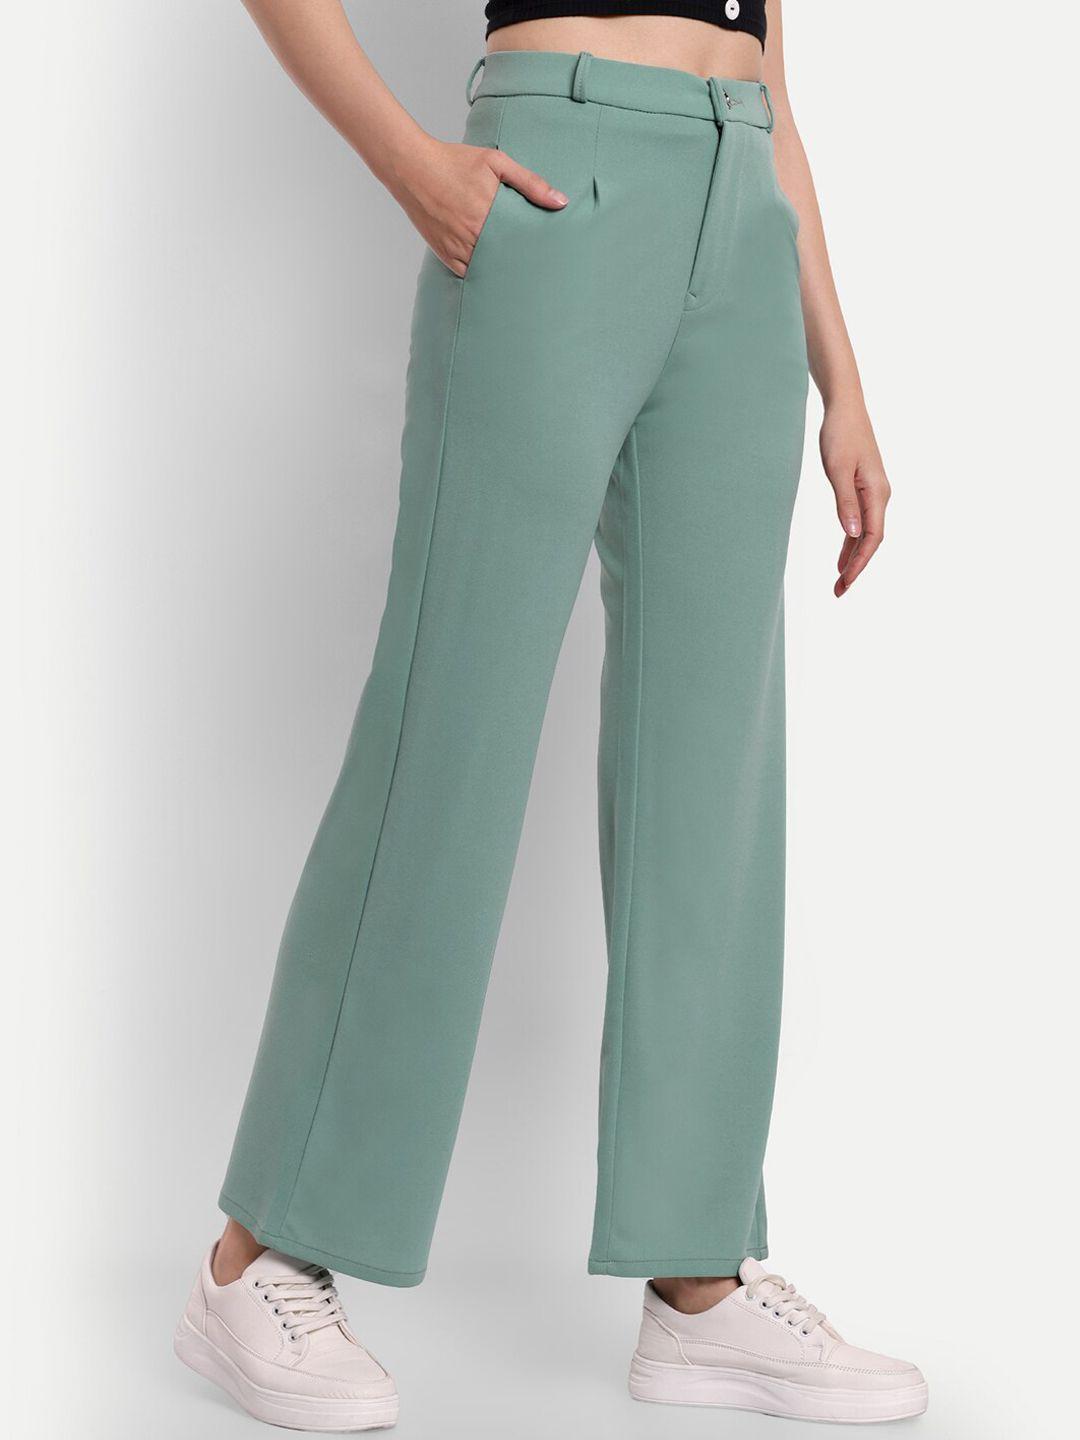 broadstar-women-green-smart-loose-fit-high-rise-easy-wash-pleated-trousers